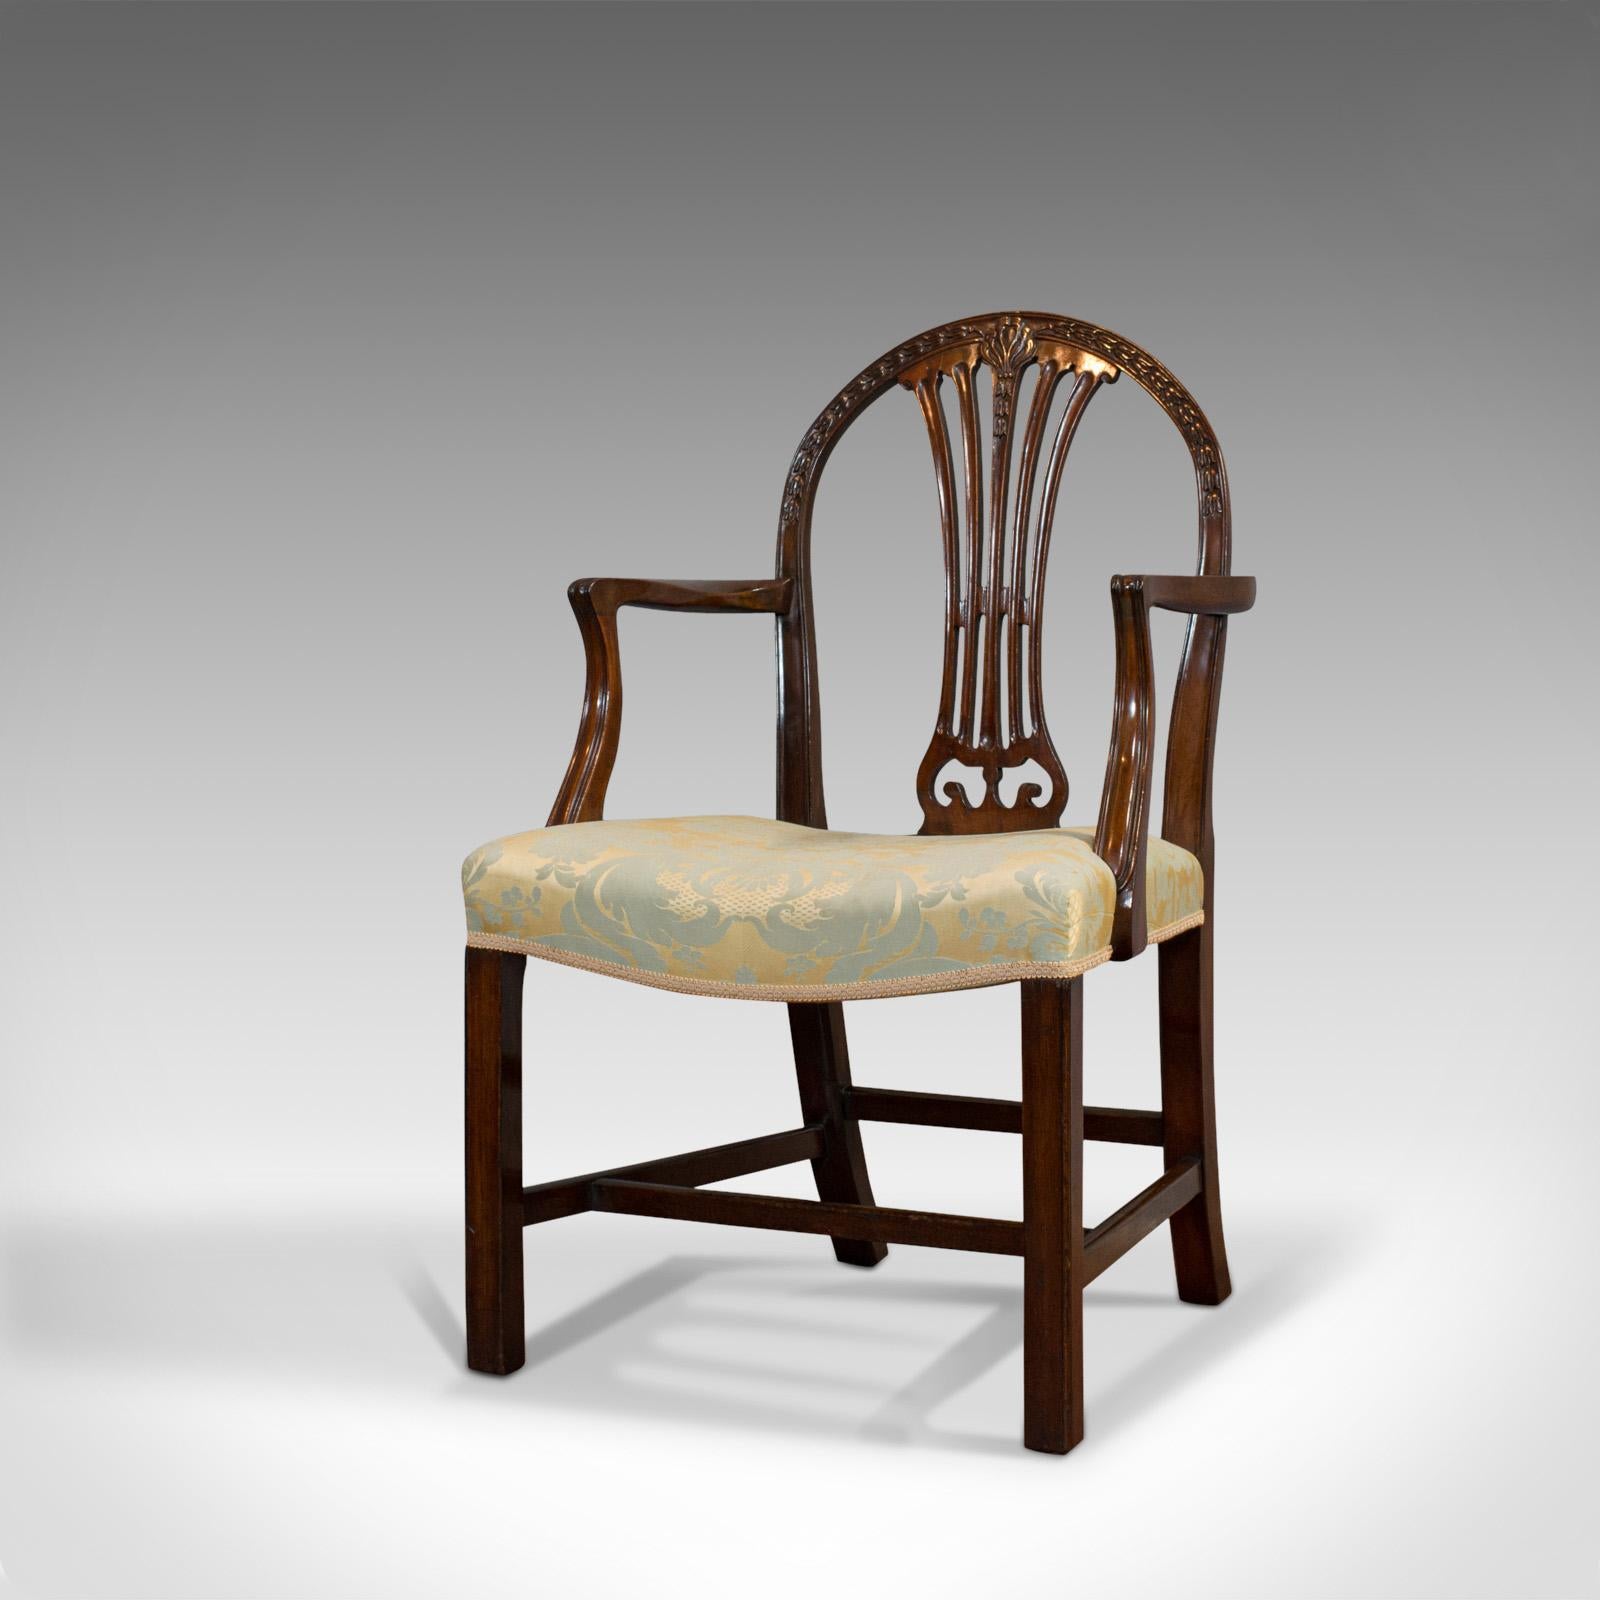 Late Victorian Pair of Antique Hepplewhite Revival Carvers, Mahogany, Armchair, Victorian